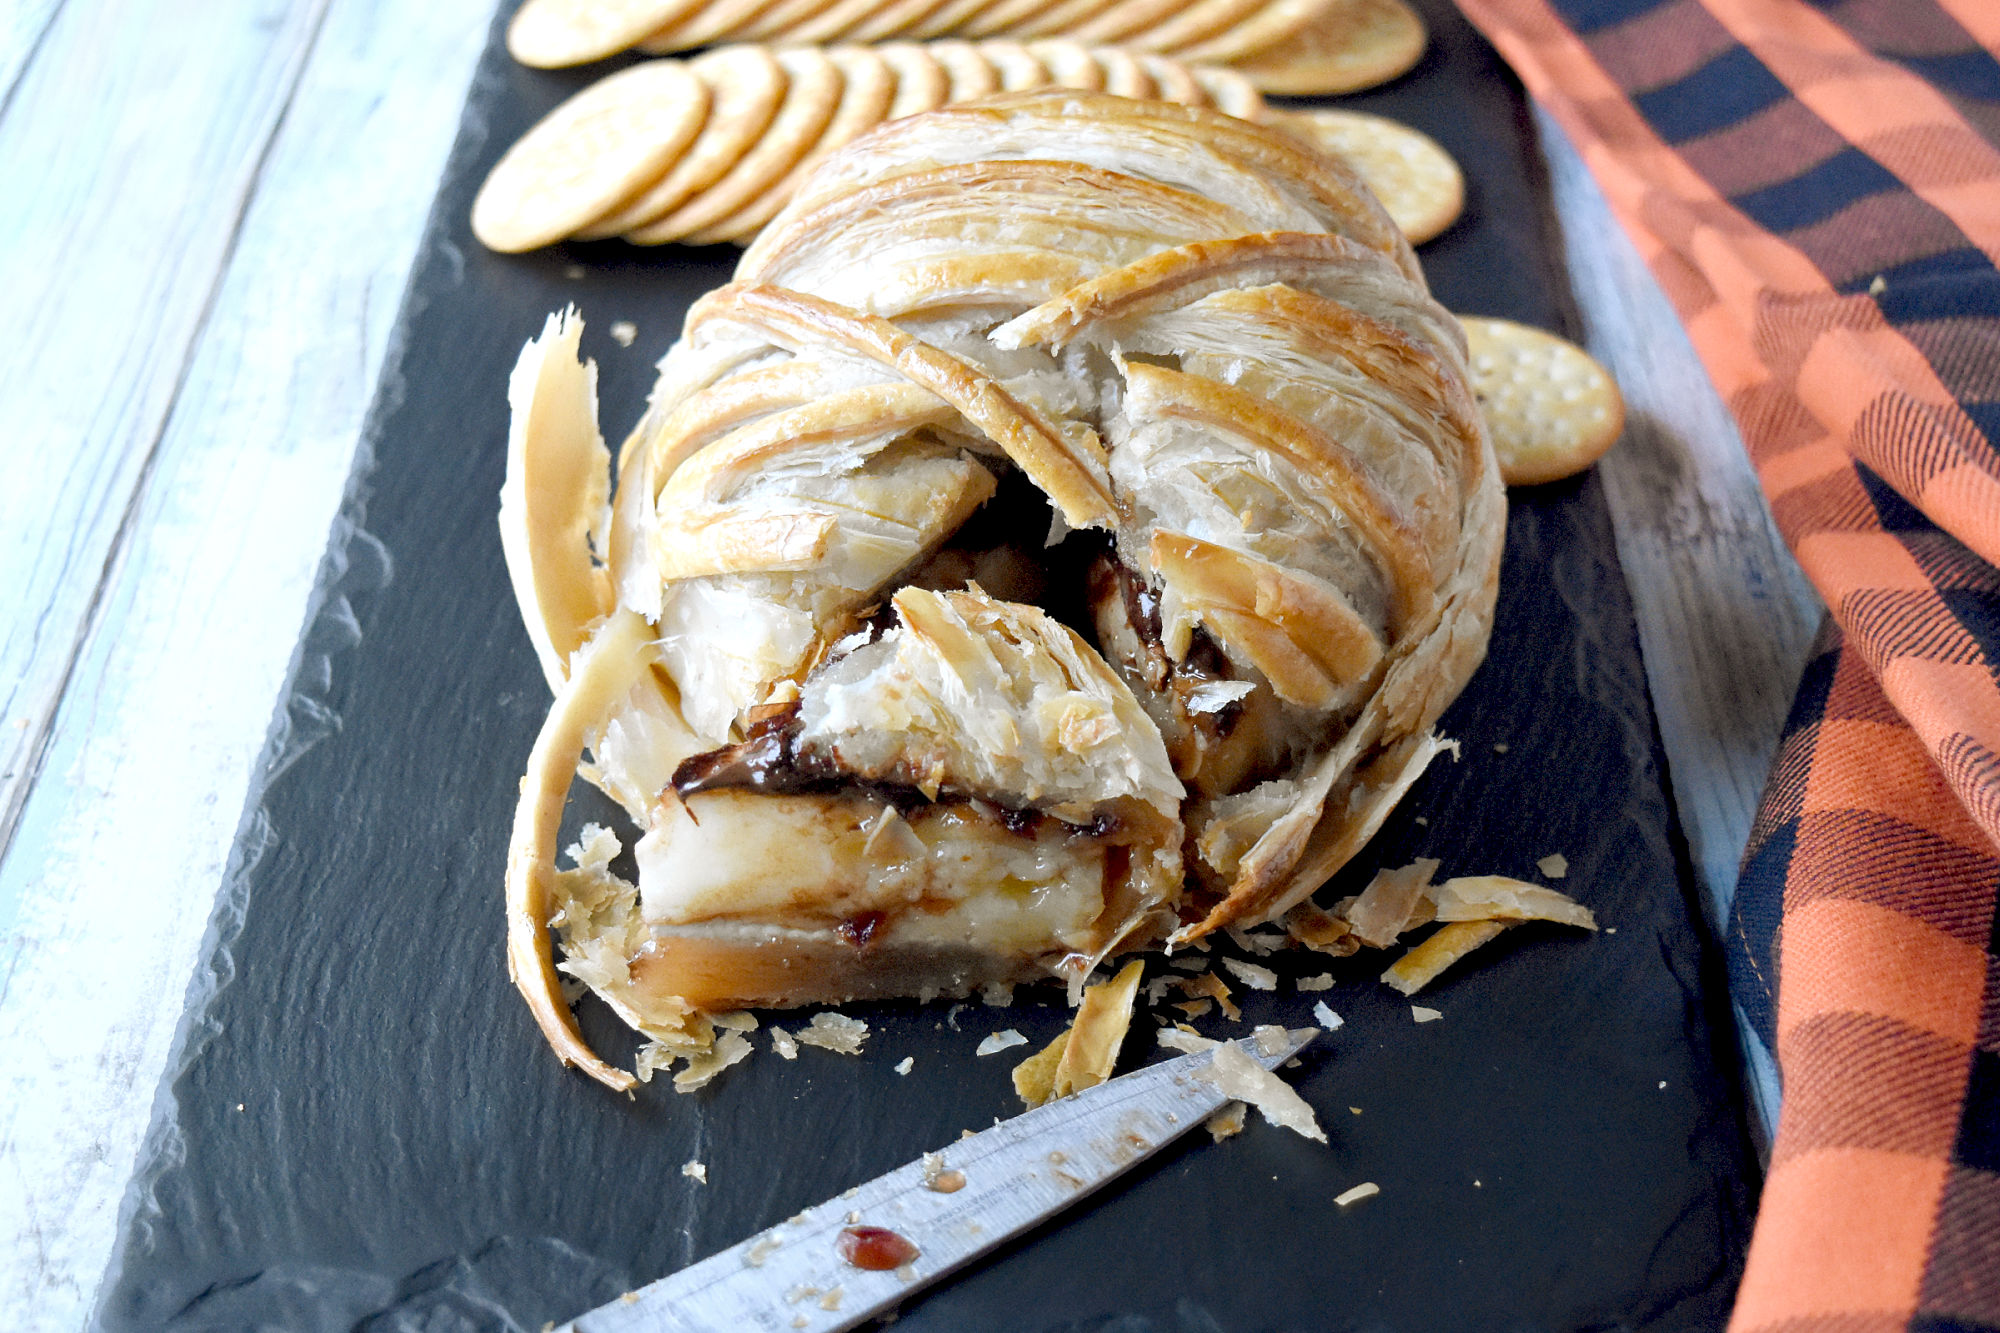 Oozing Mummy Baked Brie is topped with dried cranberries simmered in orange juice and dark chocolate chips.  It’s a sweet and savory treat for an appetizer or dessert and super simple to make. #HalloweenTreatsWeek #bakedbrie